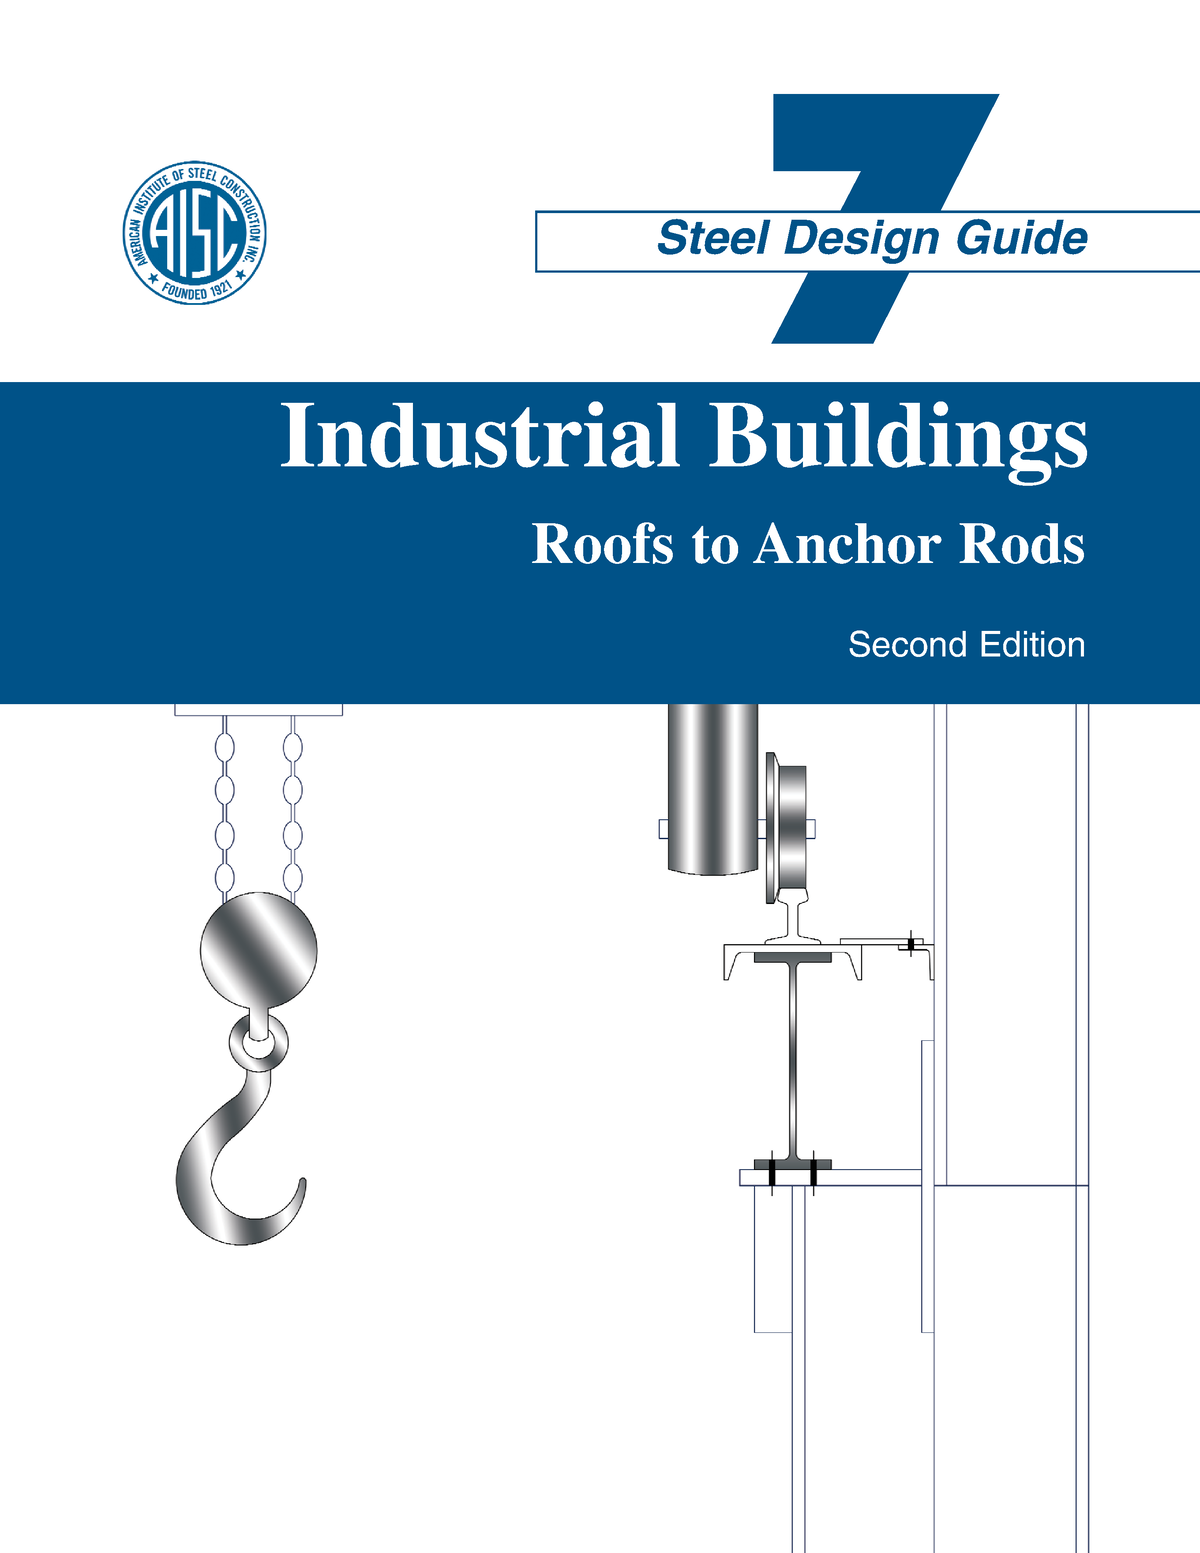 Design Guide 07 Industrial Buildings-Roofs to Achor Rods (Second